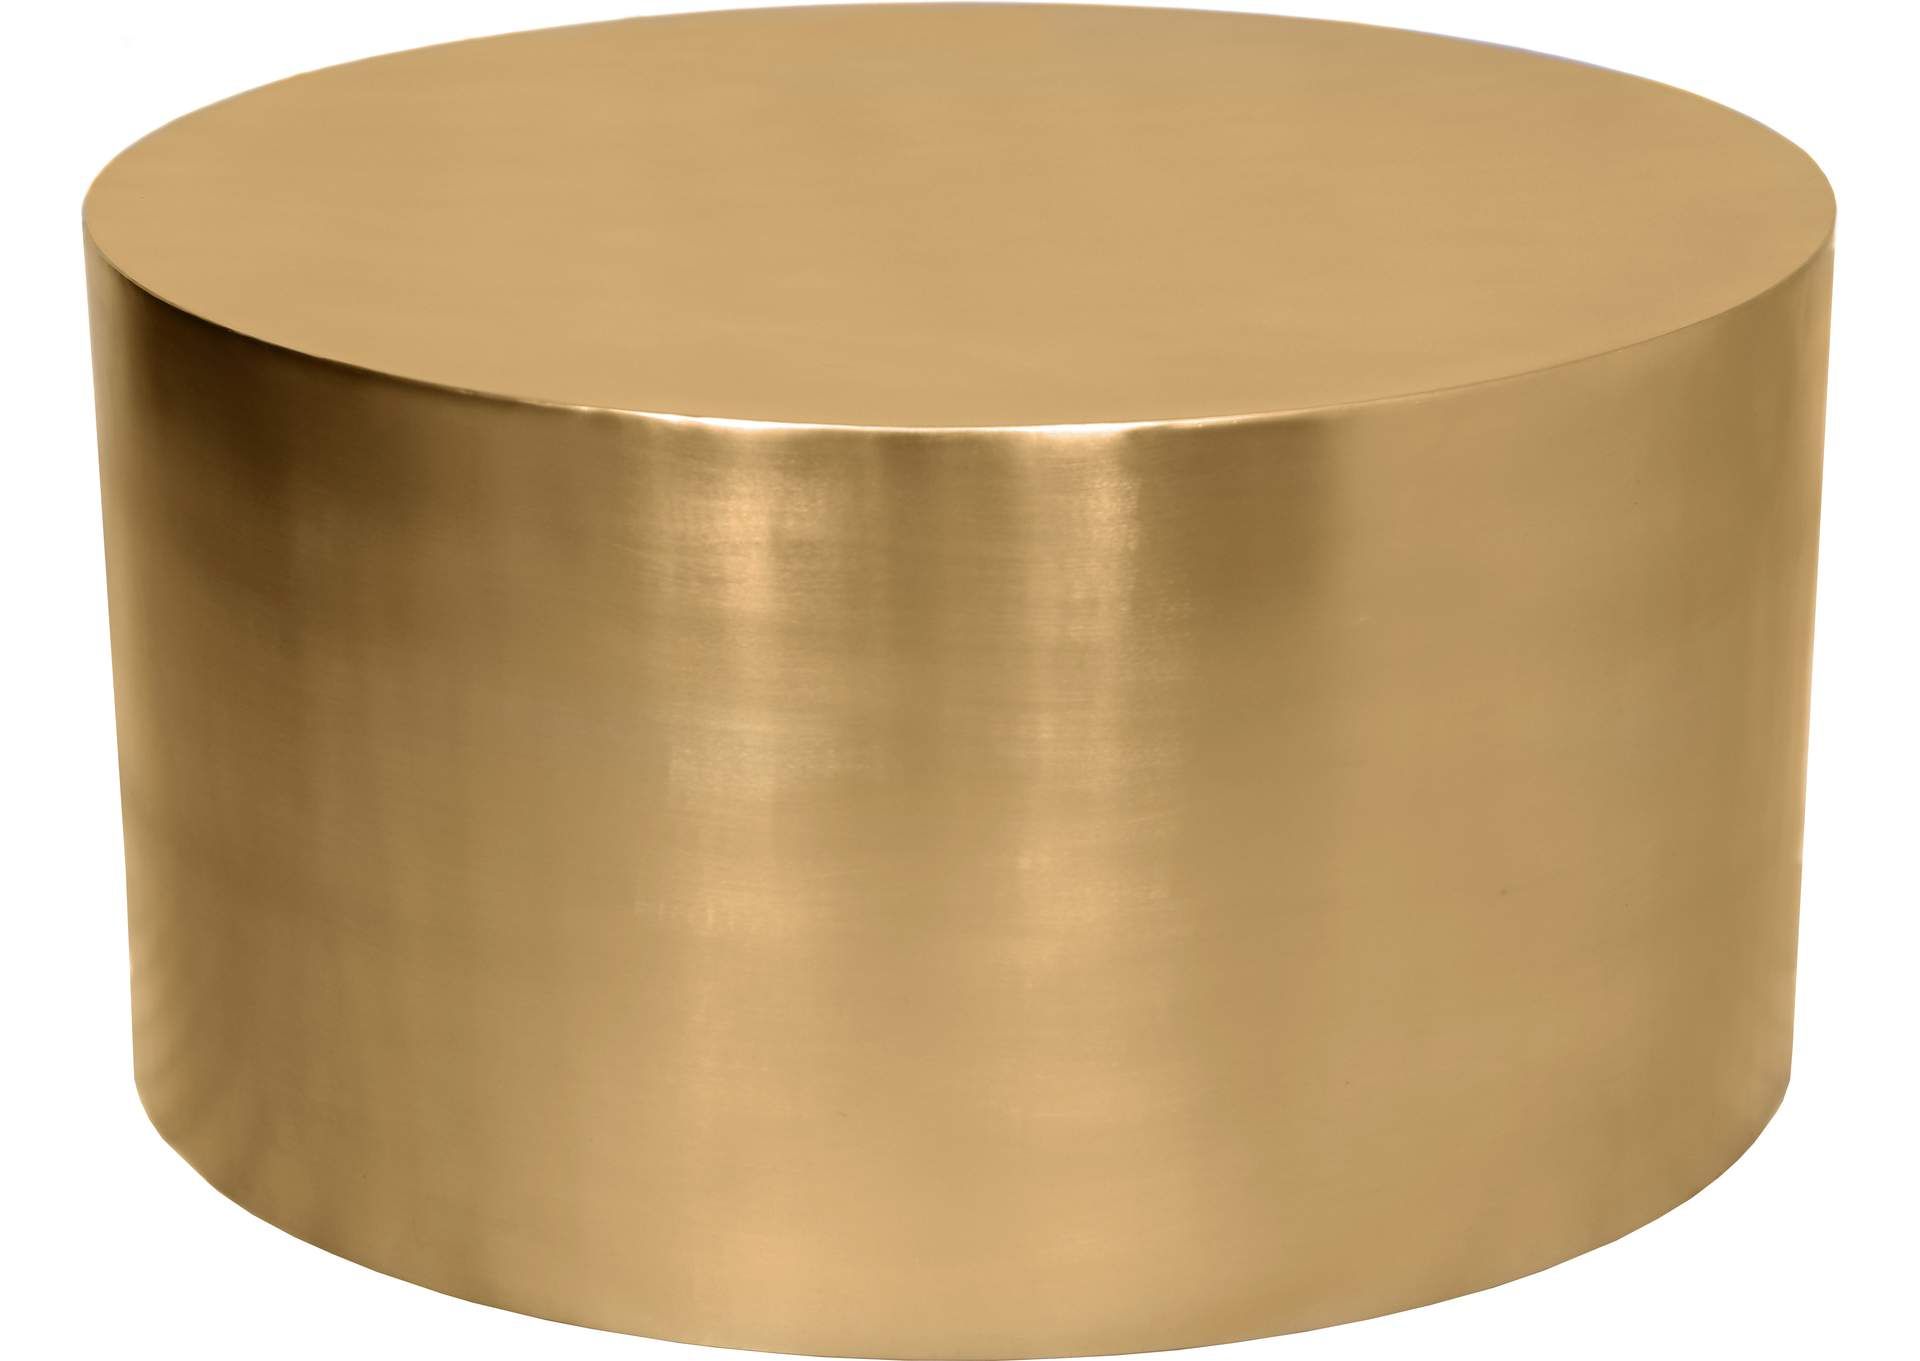 Cylinder Brushed Gold Coffee Table Best Buy Furniture And Mattress Regarding Latest Satin Gold Coffee Tables (View 15 of 20)